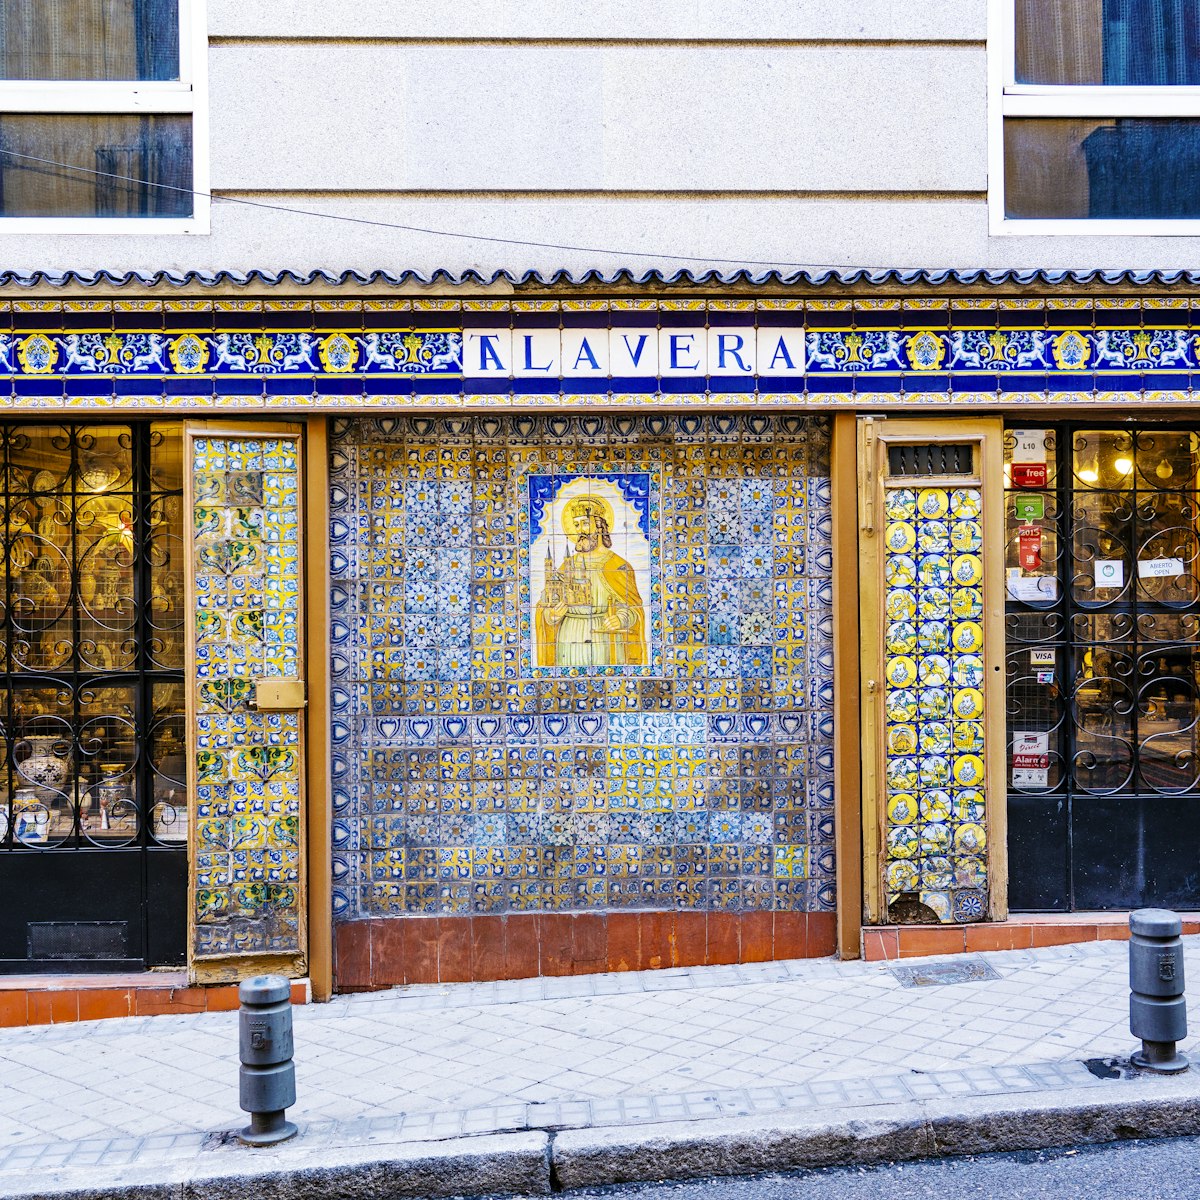 Madrid, Spain - August 18, 2021: The Antigua Casa Talavera sells traditional handmade pottery and tile from all over Spain in this downtown Madrid, Spain store. The store was opened in 1904 and is still family operated.
1342196704
talavera, antigua casa talavera